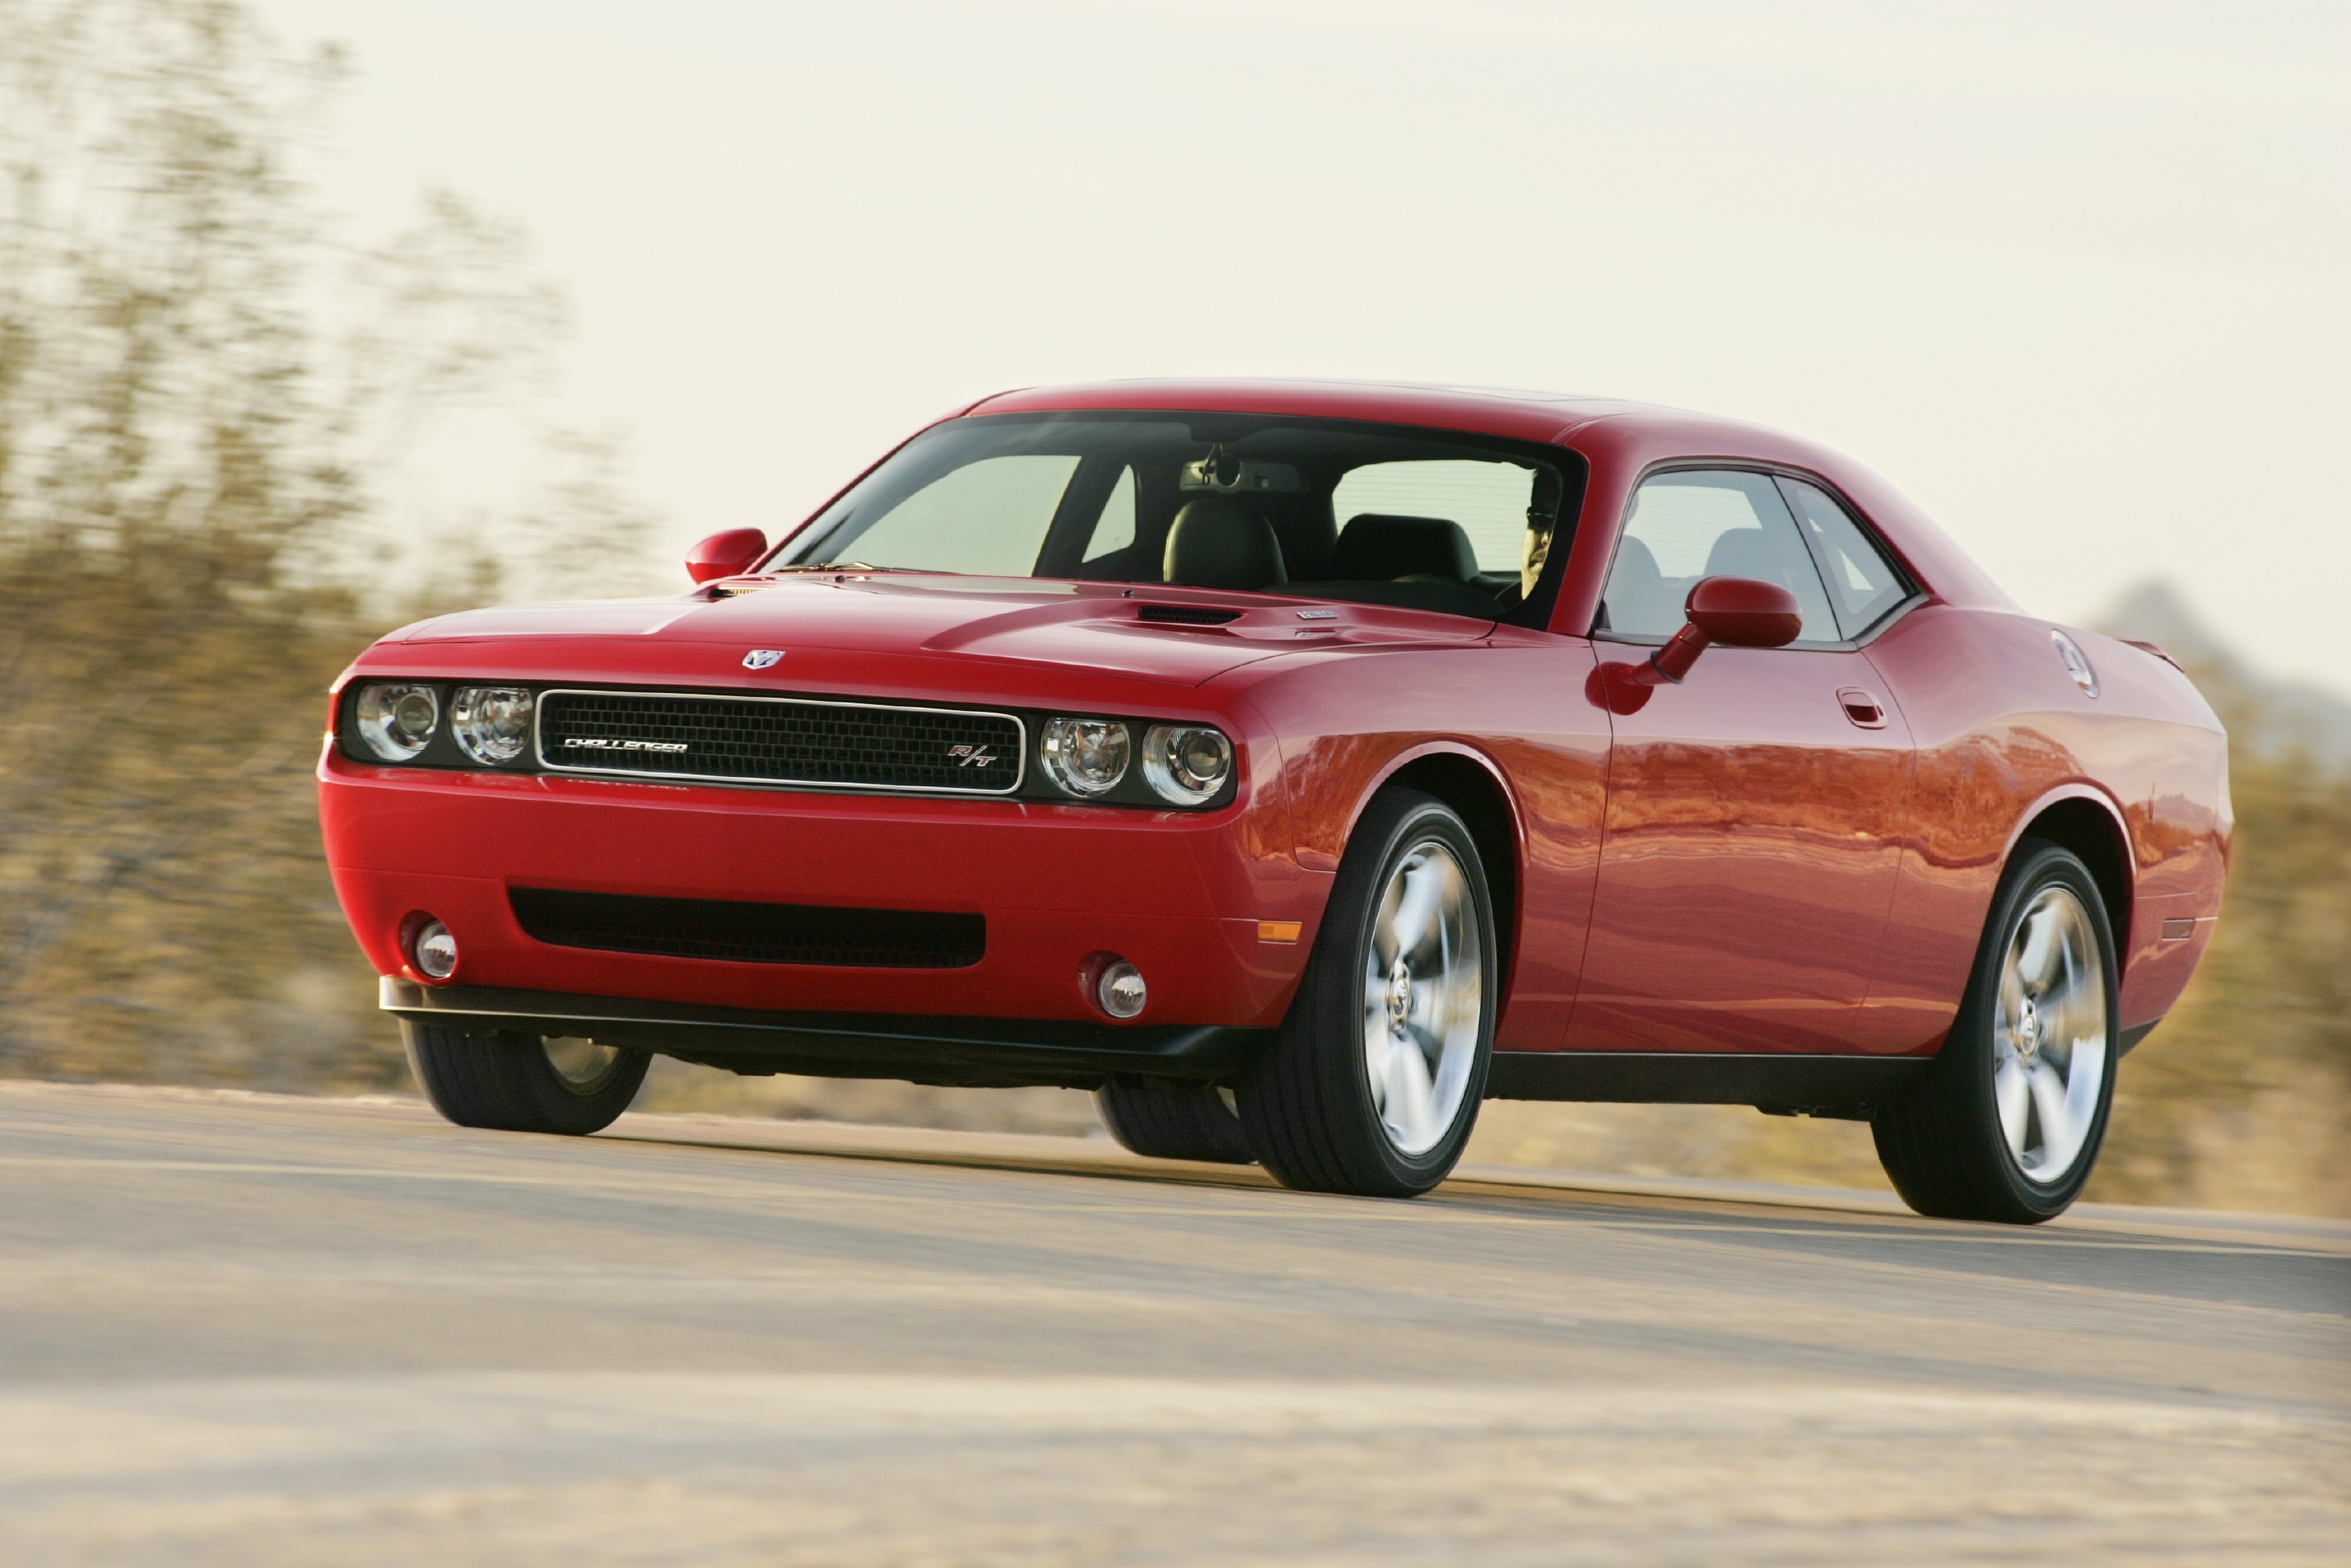 Here's what to look for when shopping for a 2009-2014 Dodge Challenger R/T